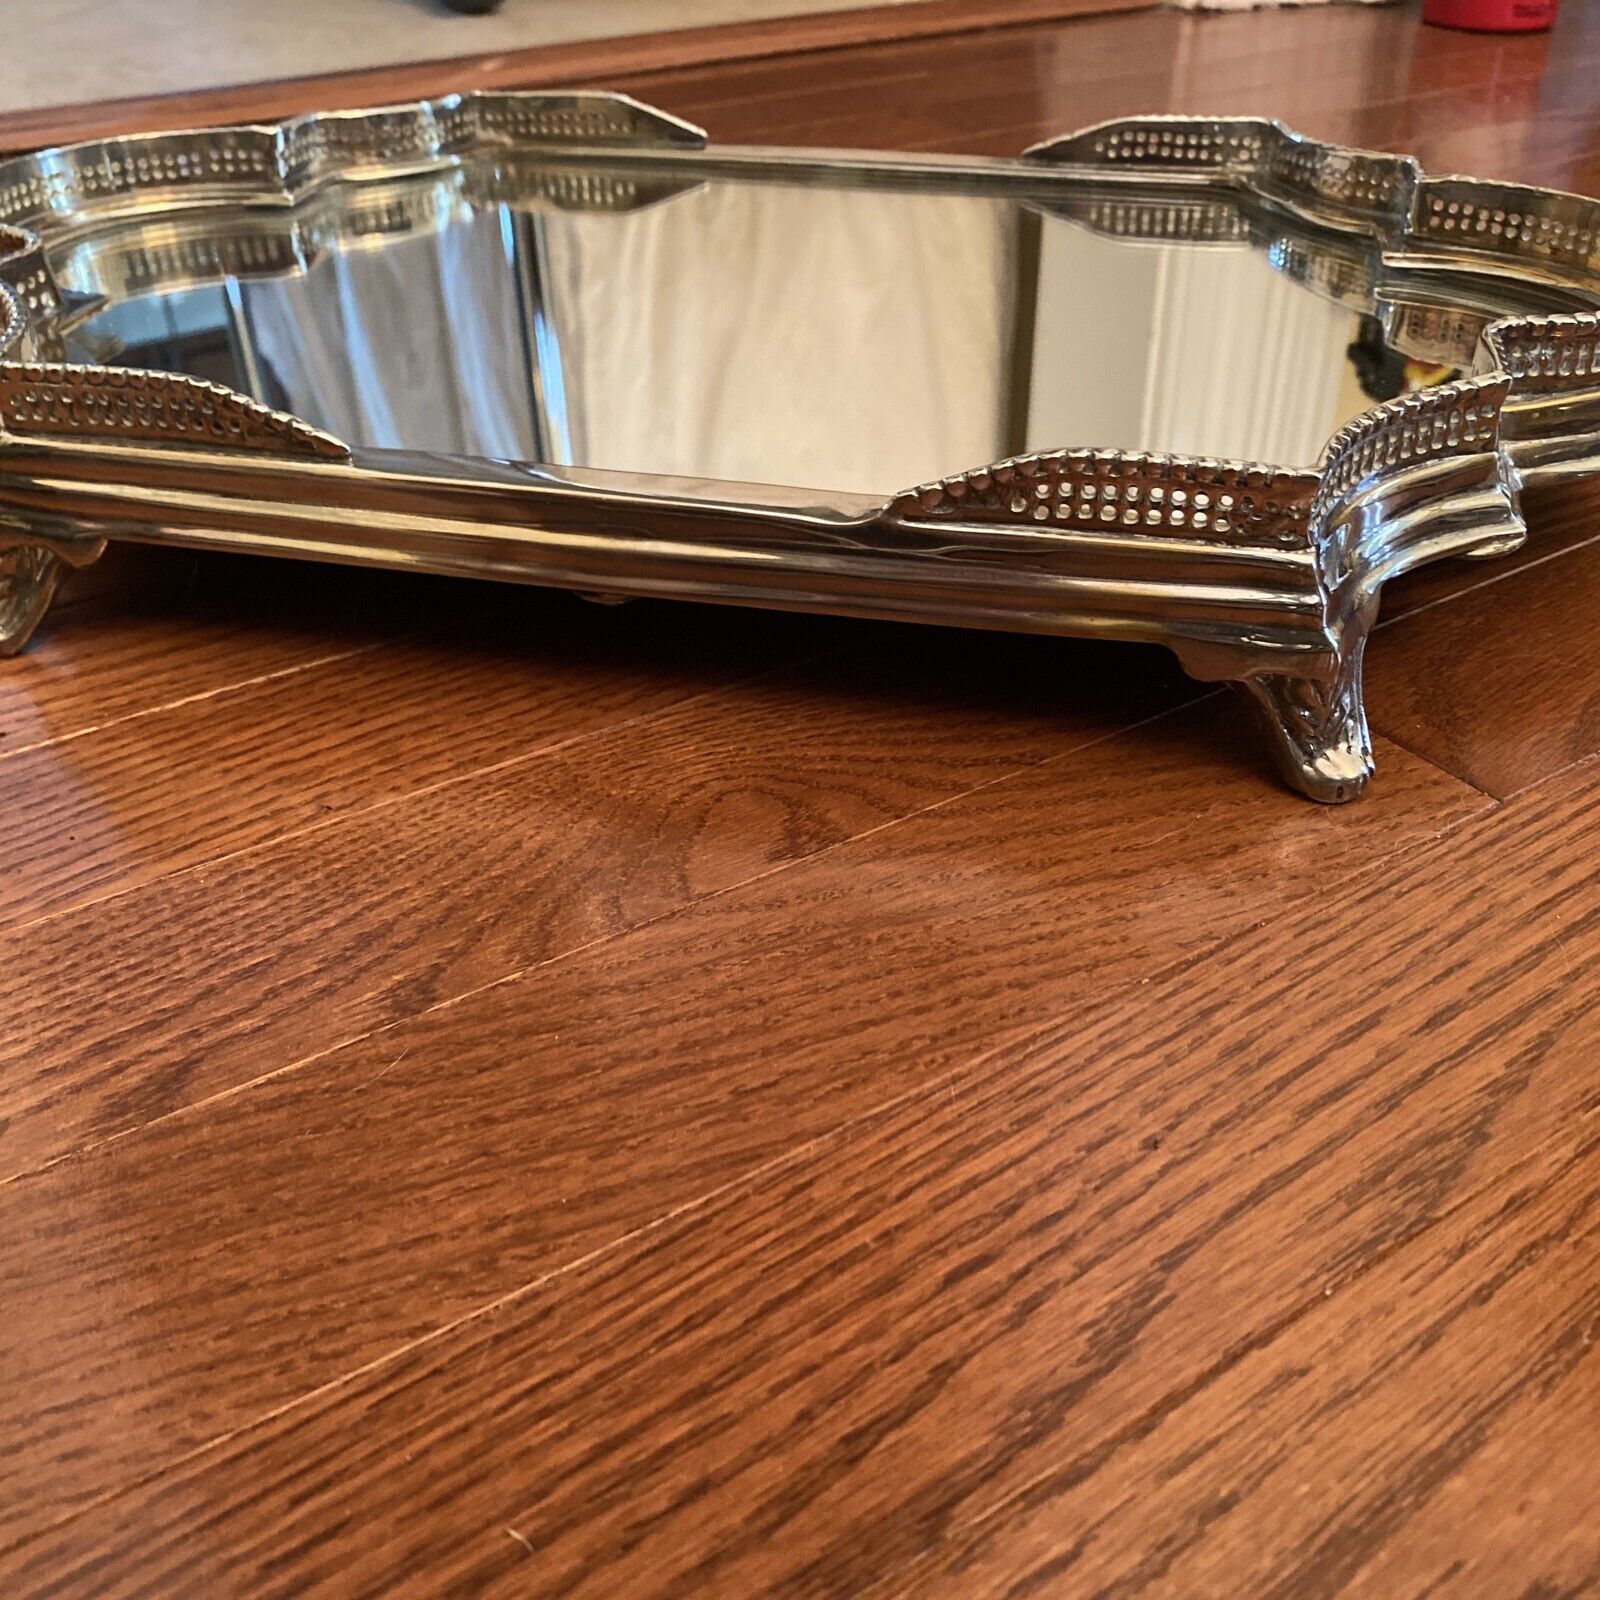 Vintage Castilian Victorian Style Silver Footed Plateau Tray with Mirror